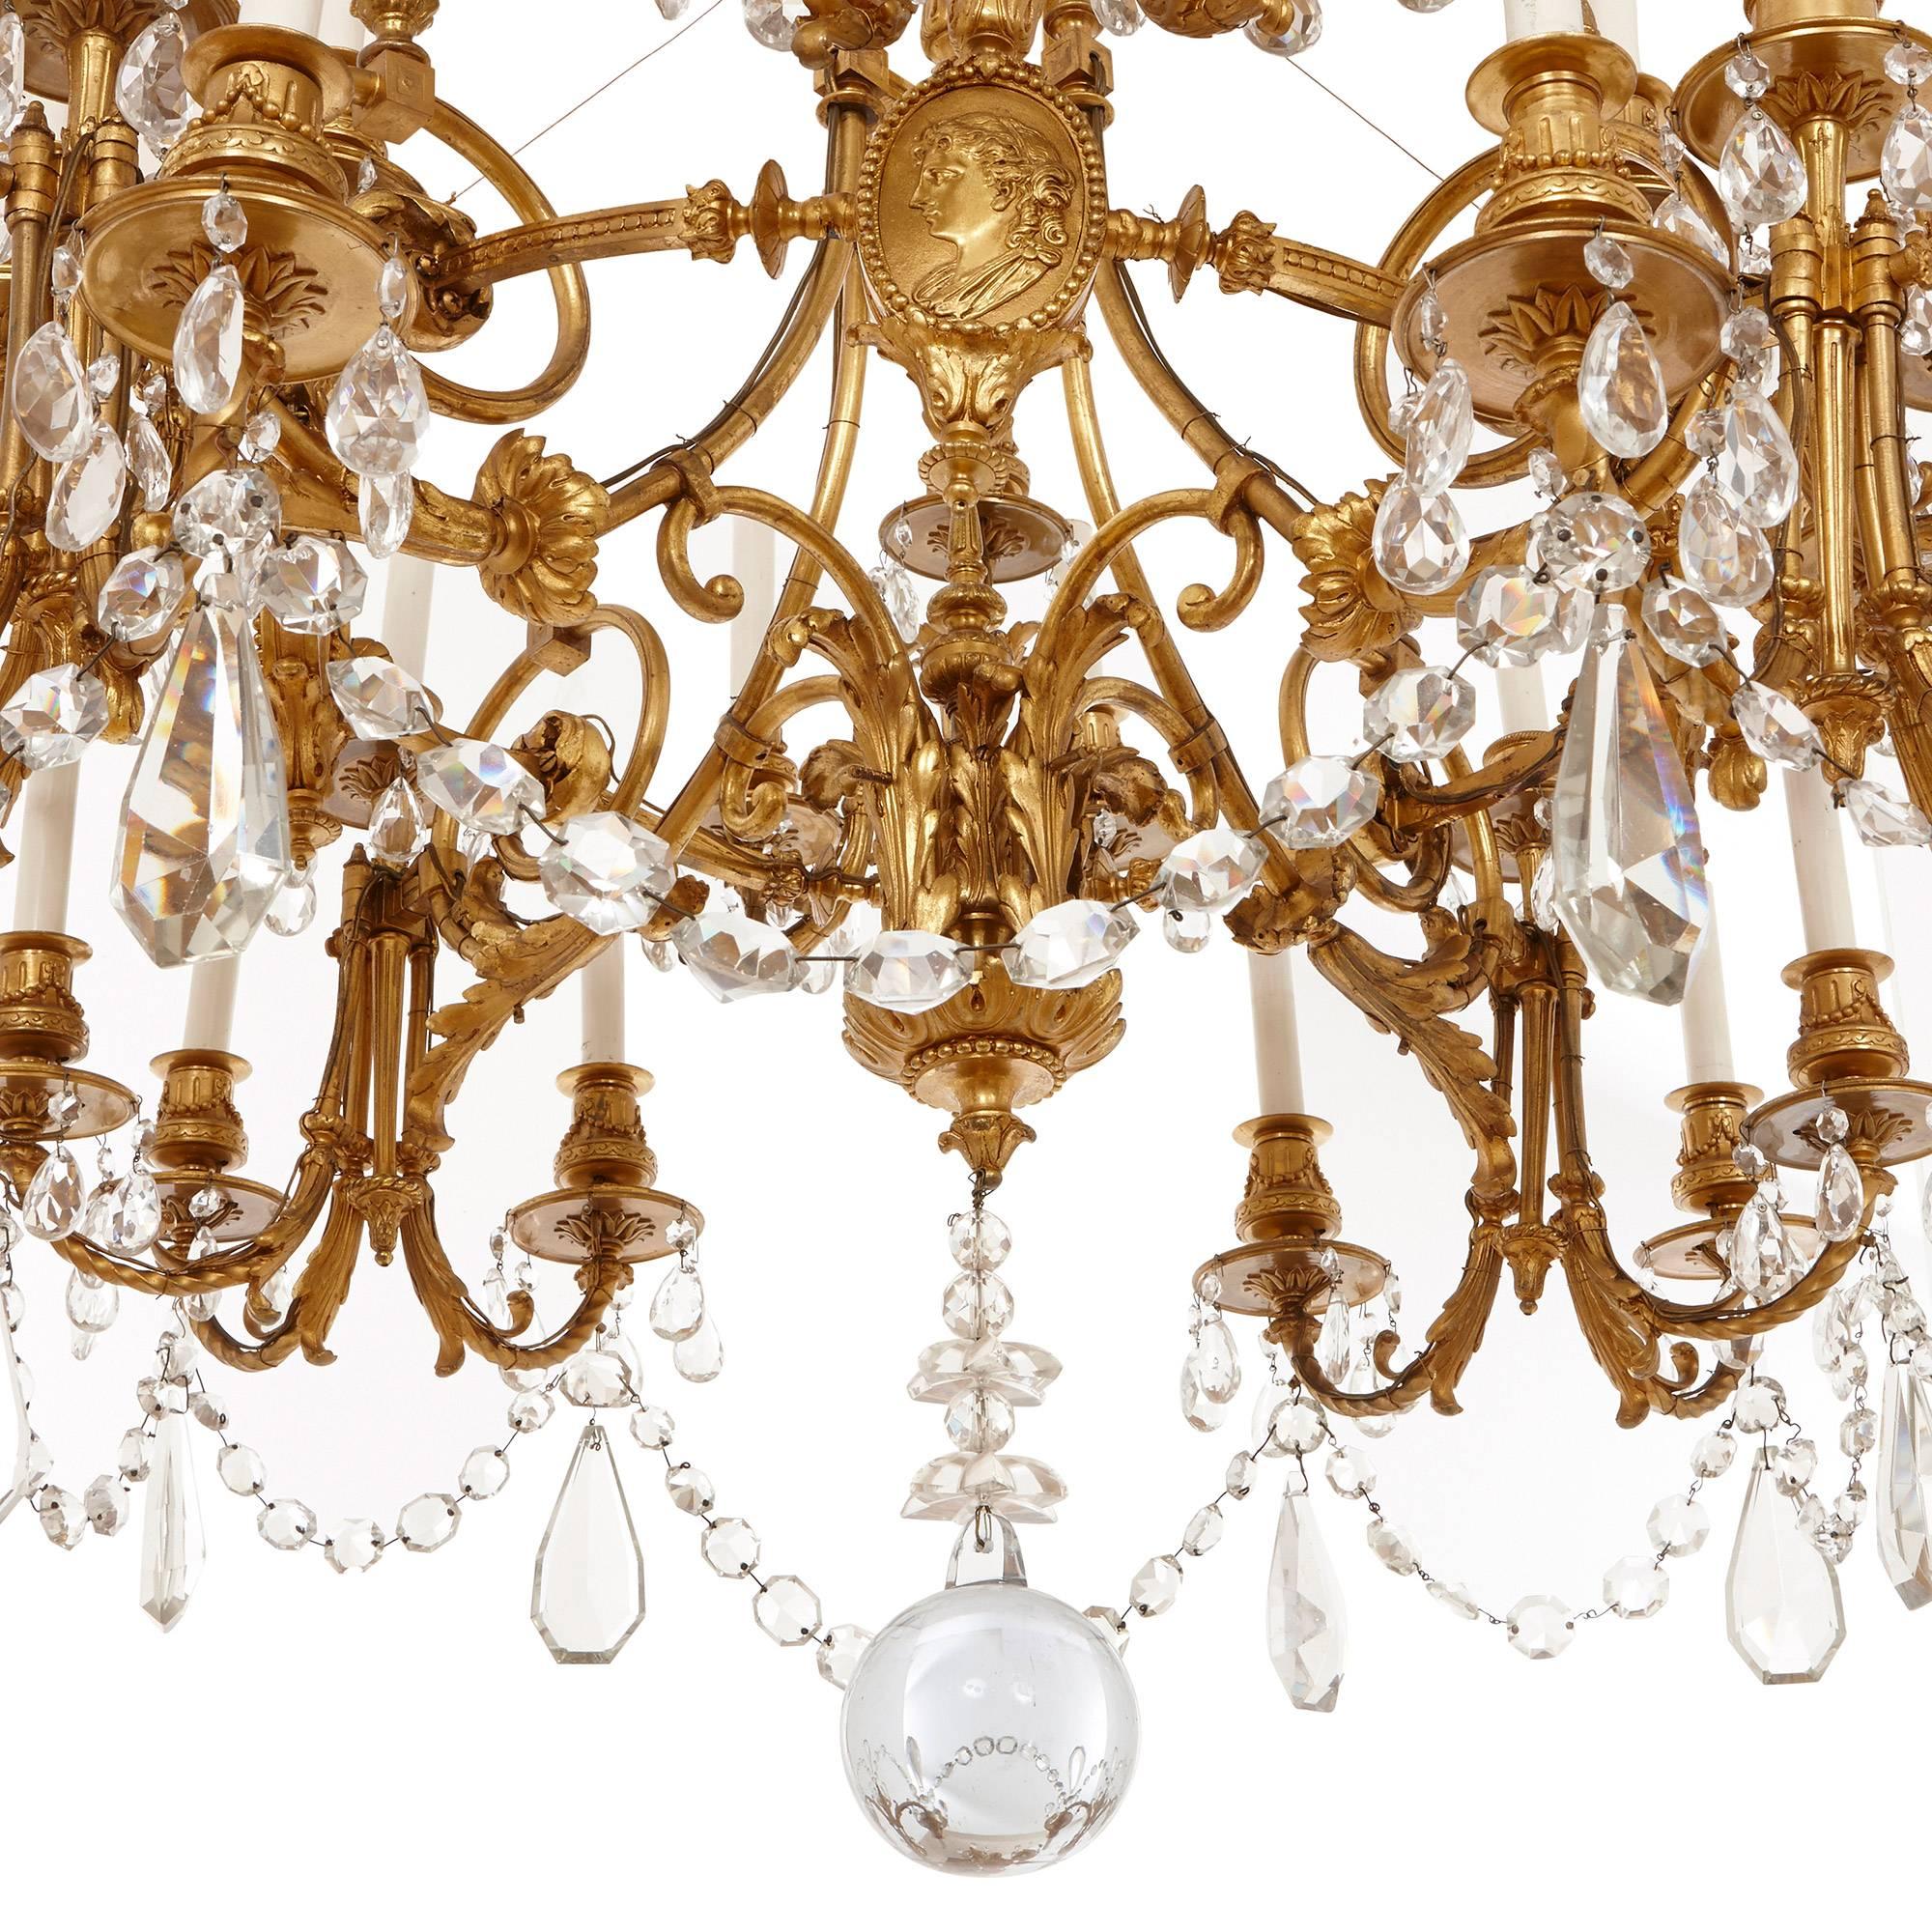 This beautiful antique chandelier, featuring exquisitely cut hanging glass droplets, would make an impressive addition to any interior space. The French chandelier is extensively detailed throughout, with four seated cherubs playing instruments